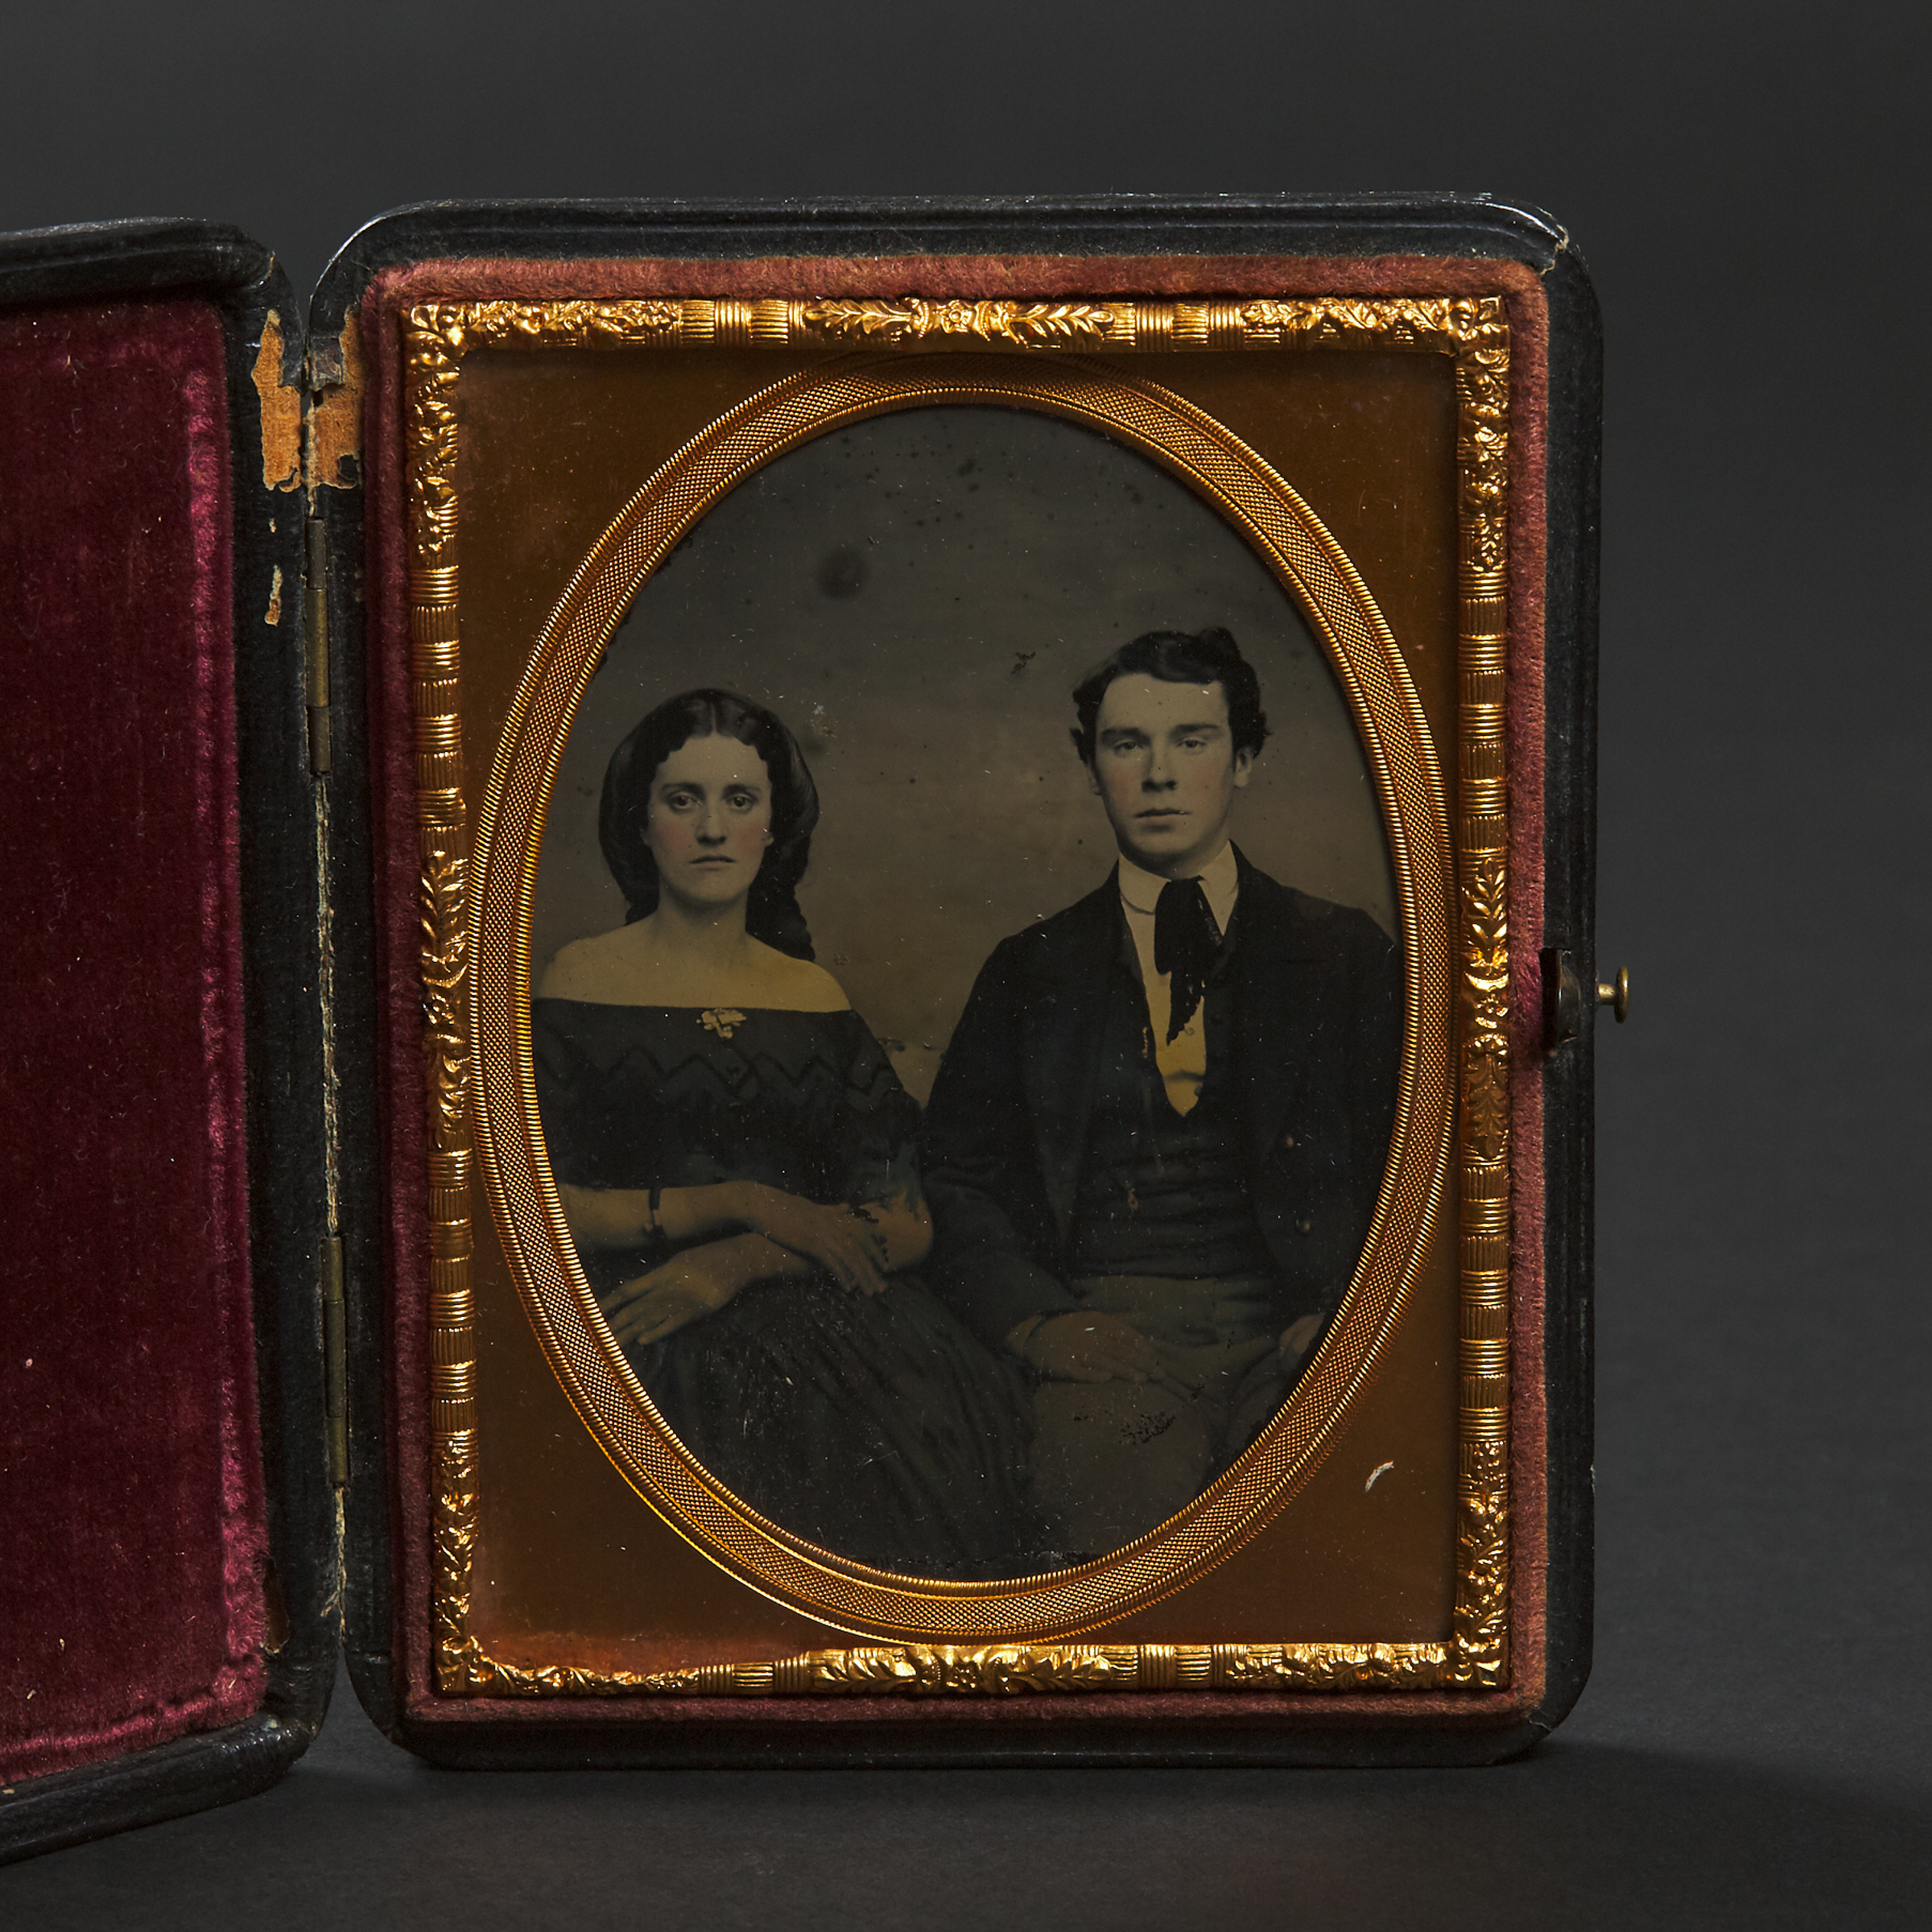 Photographic Portrait of a Young Couple, c.1860